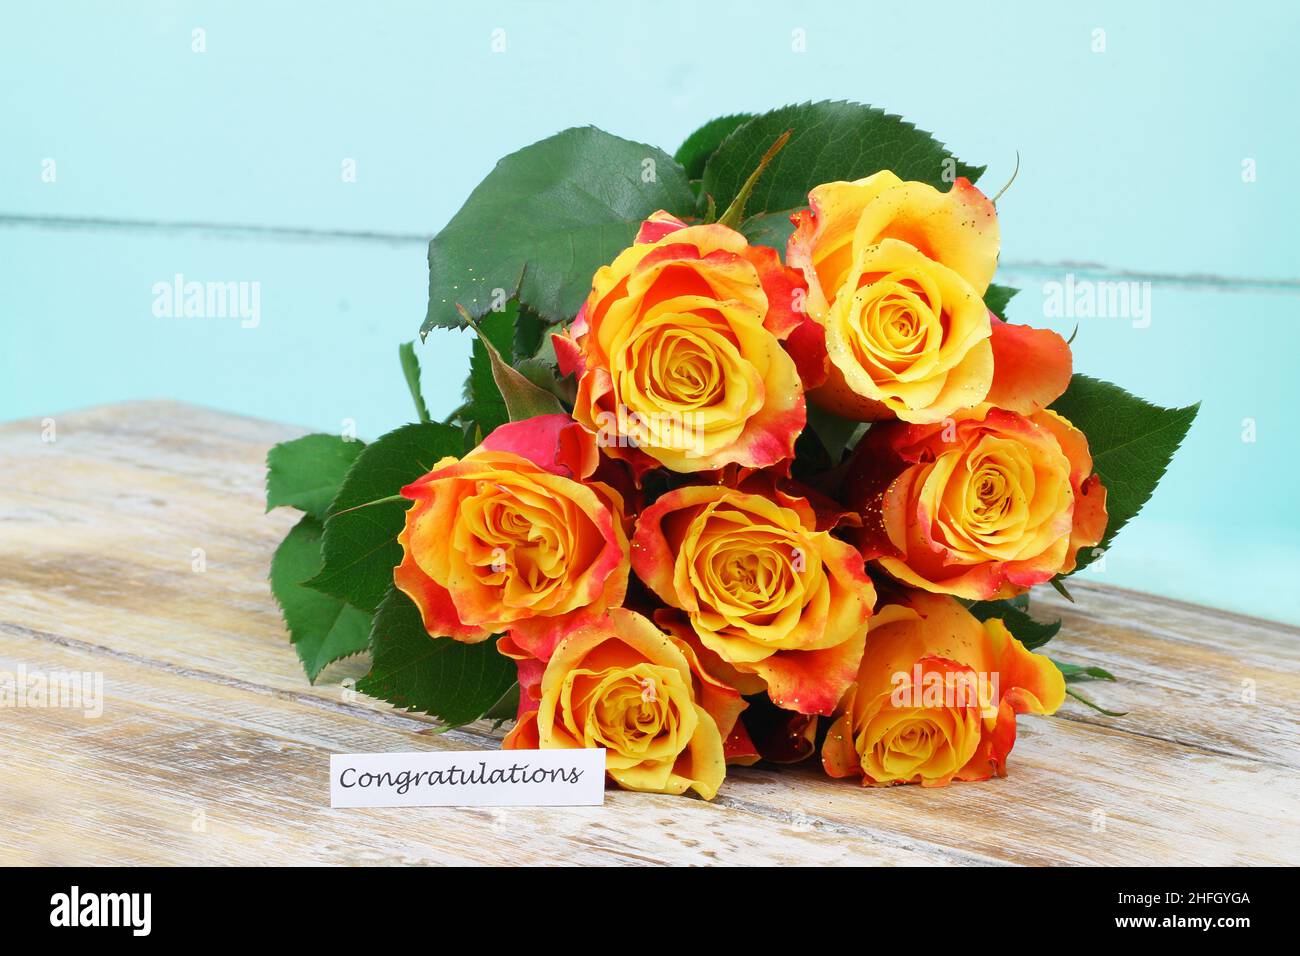 Congratulations card with colorful bouquet of roses sprinkled with glitter Stock Photo